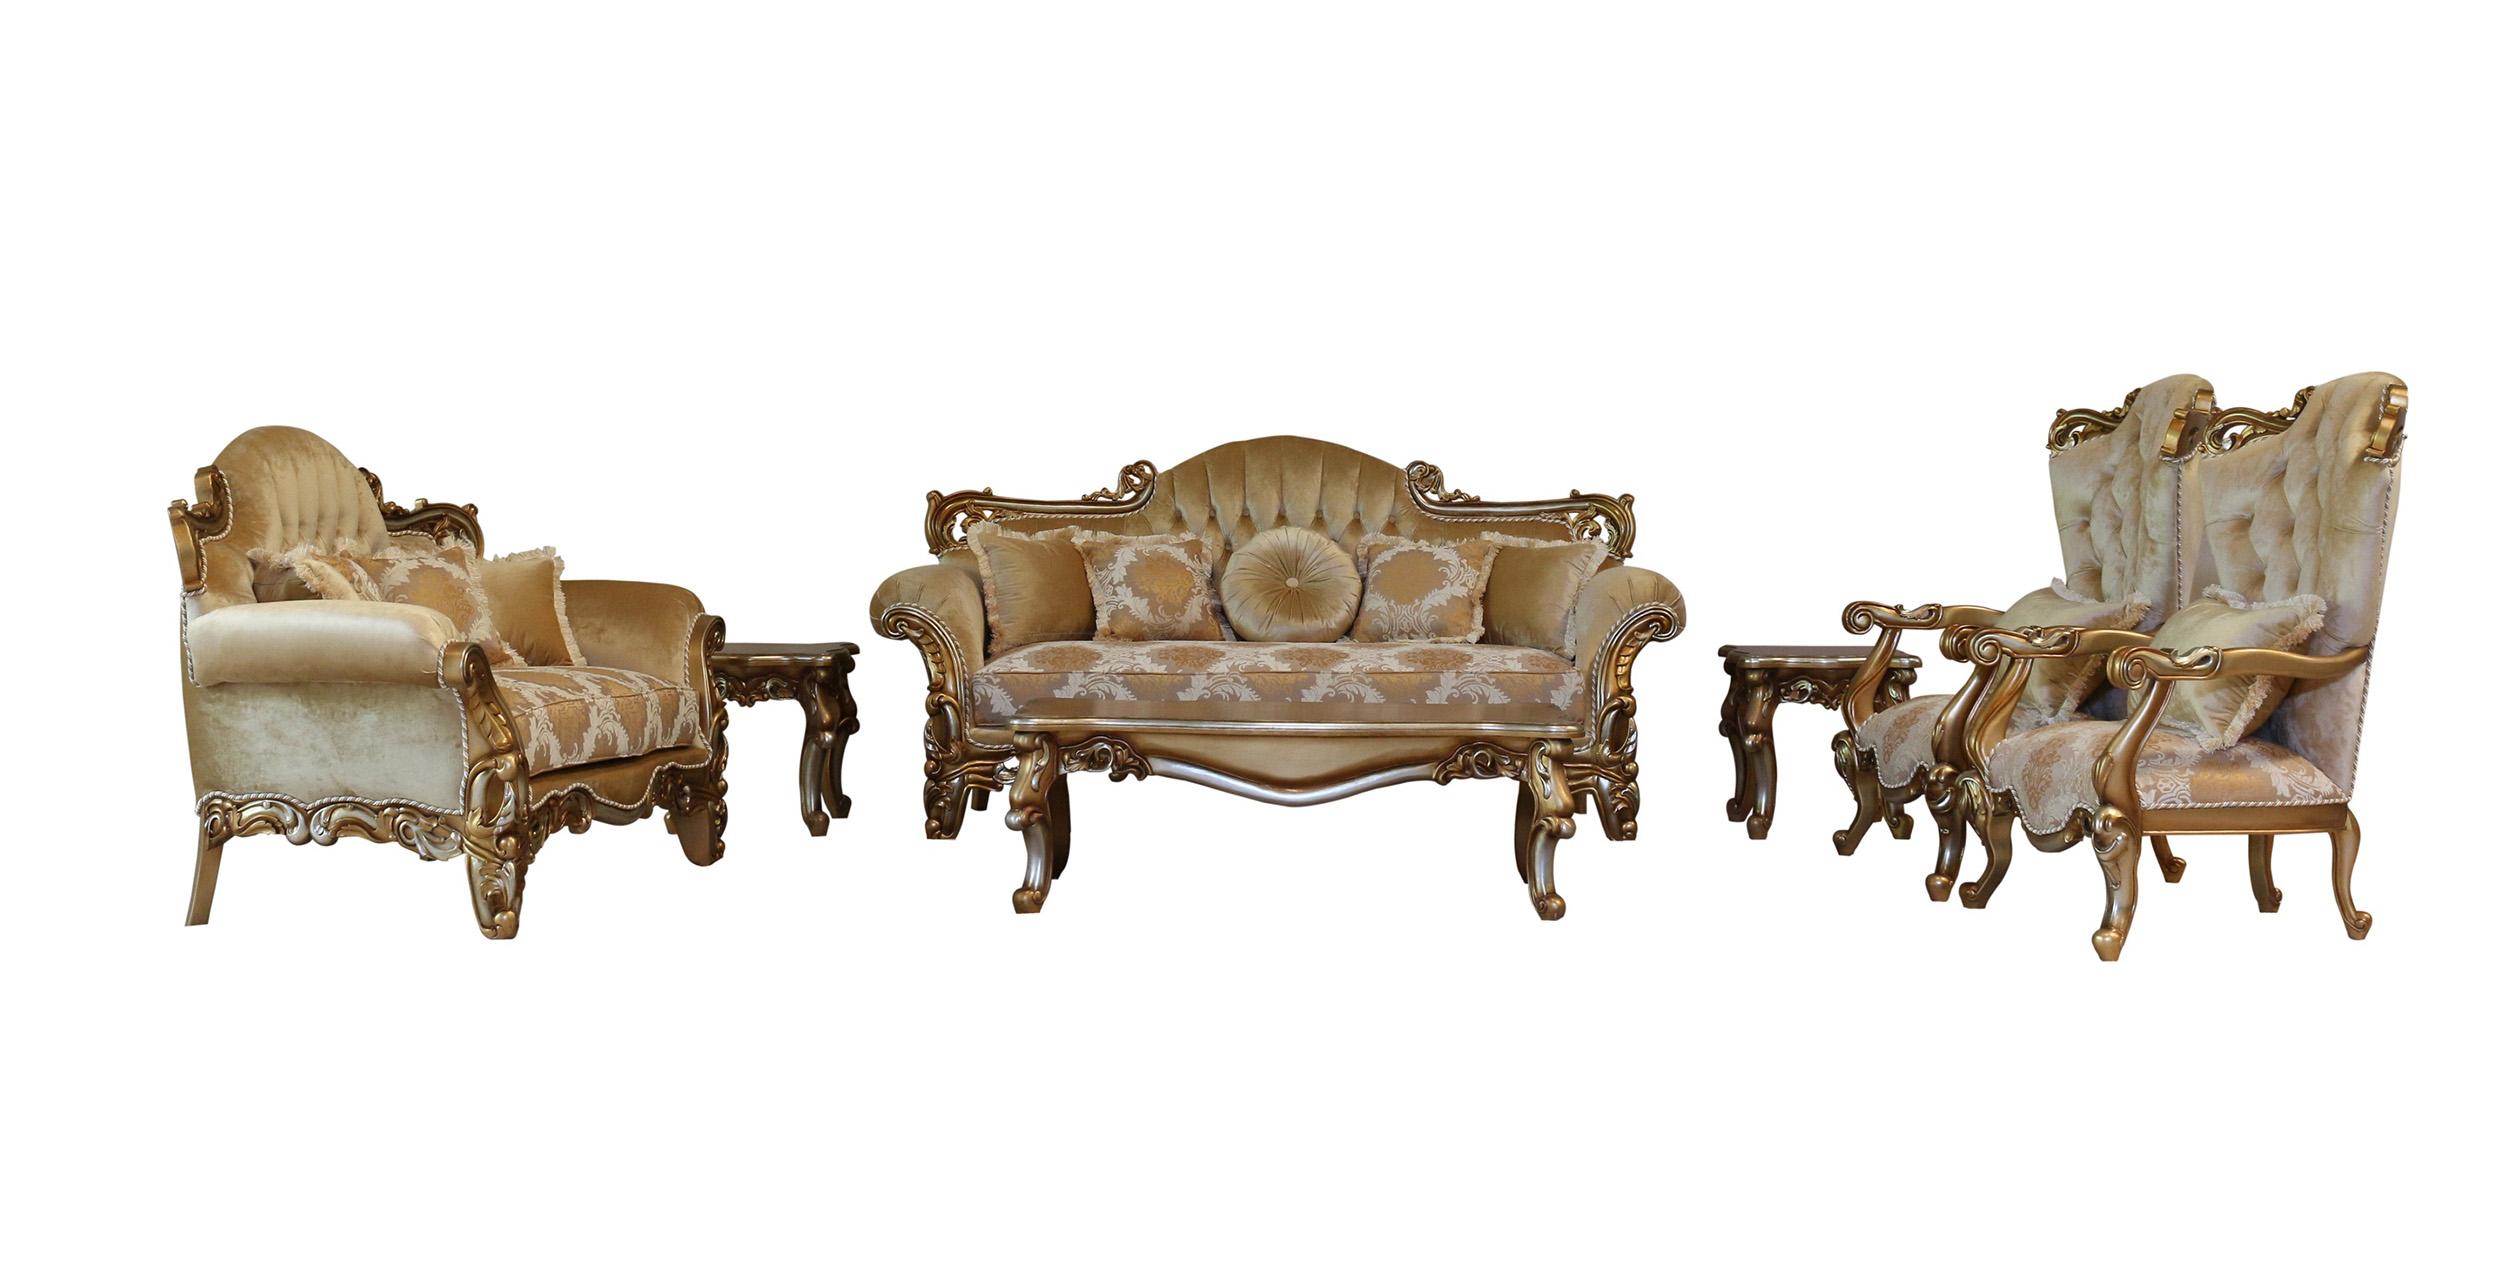 Classic, Traditional Sofa Set ALEXSANDRA 43553-Set-4 in Silver, Gold, Brown Fabric